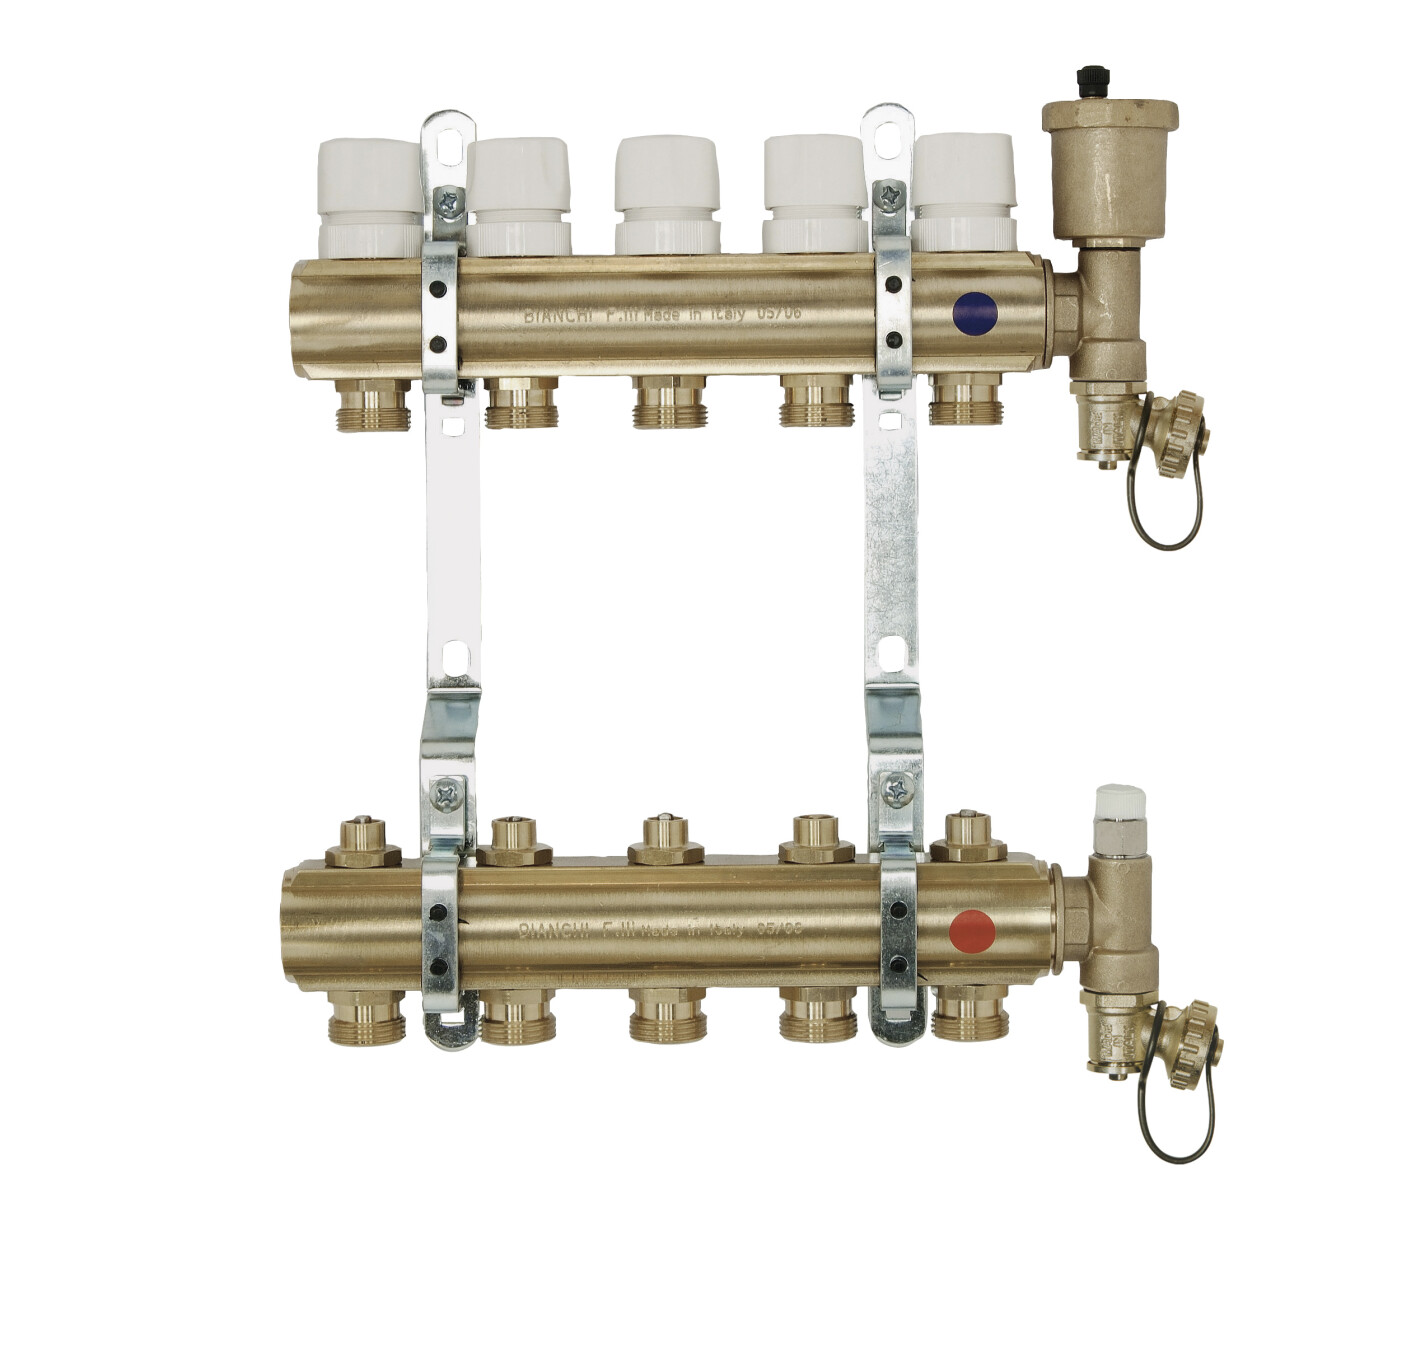 Brass manifolds therm. valves and lockshield and discharge